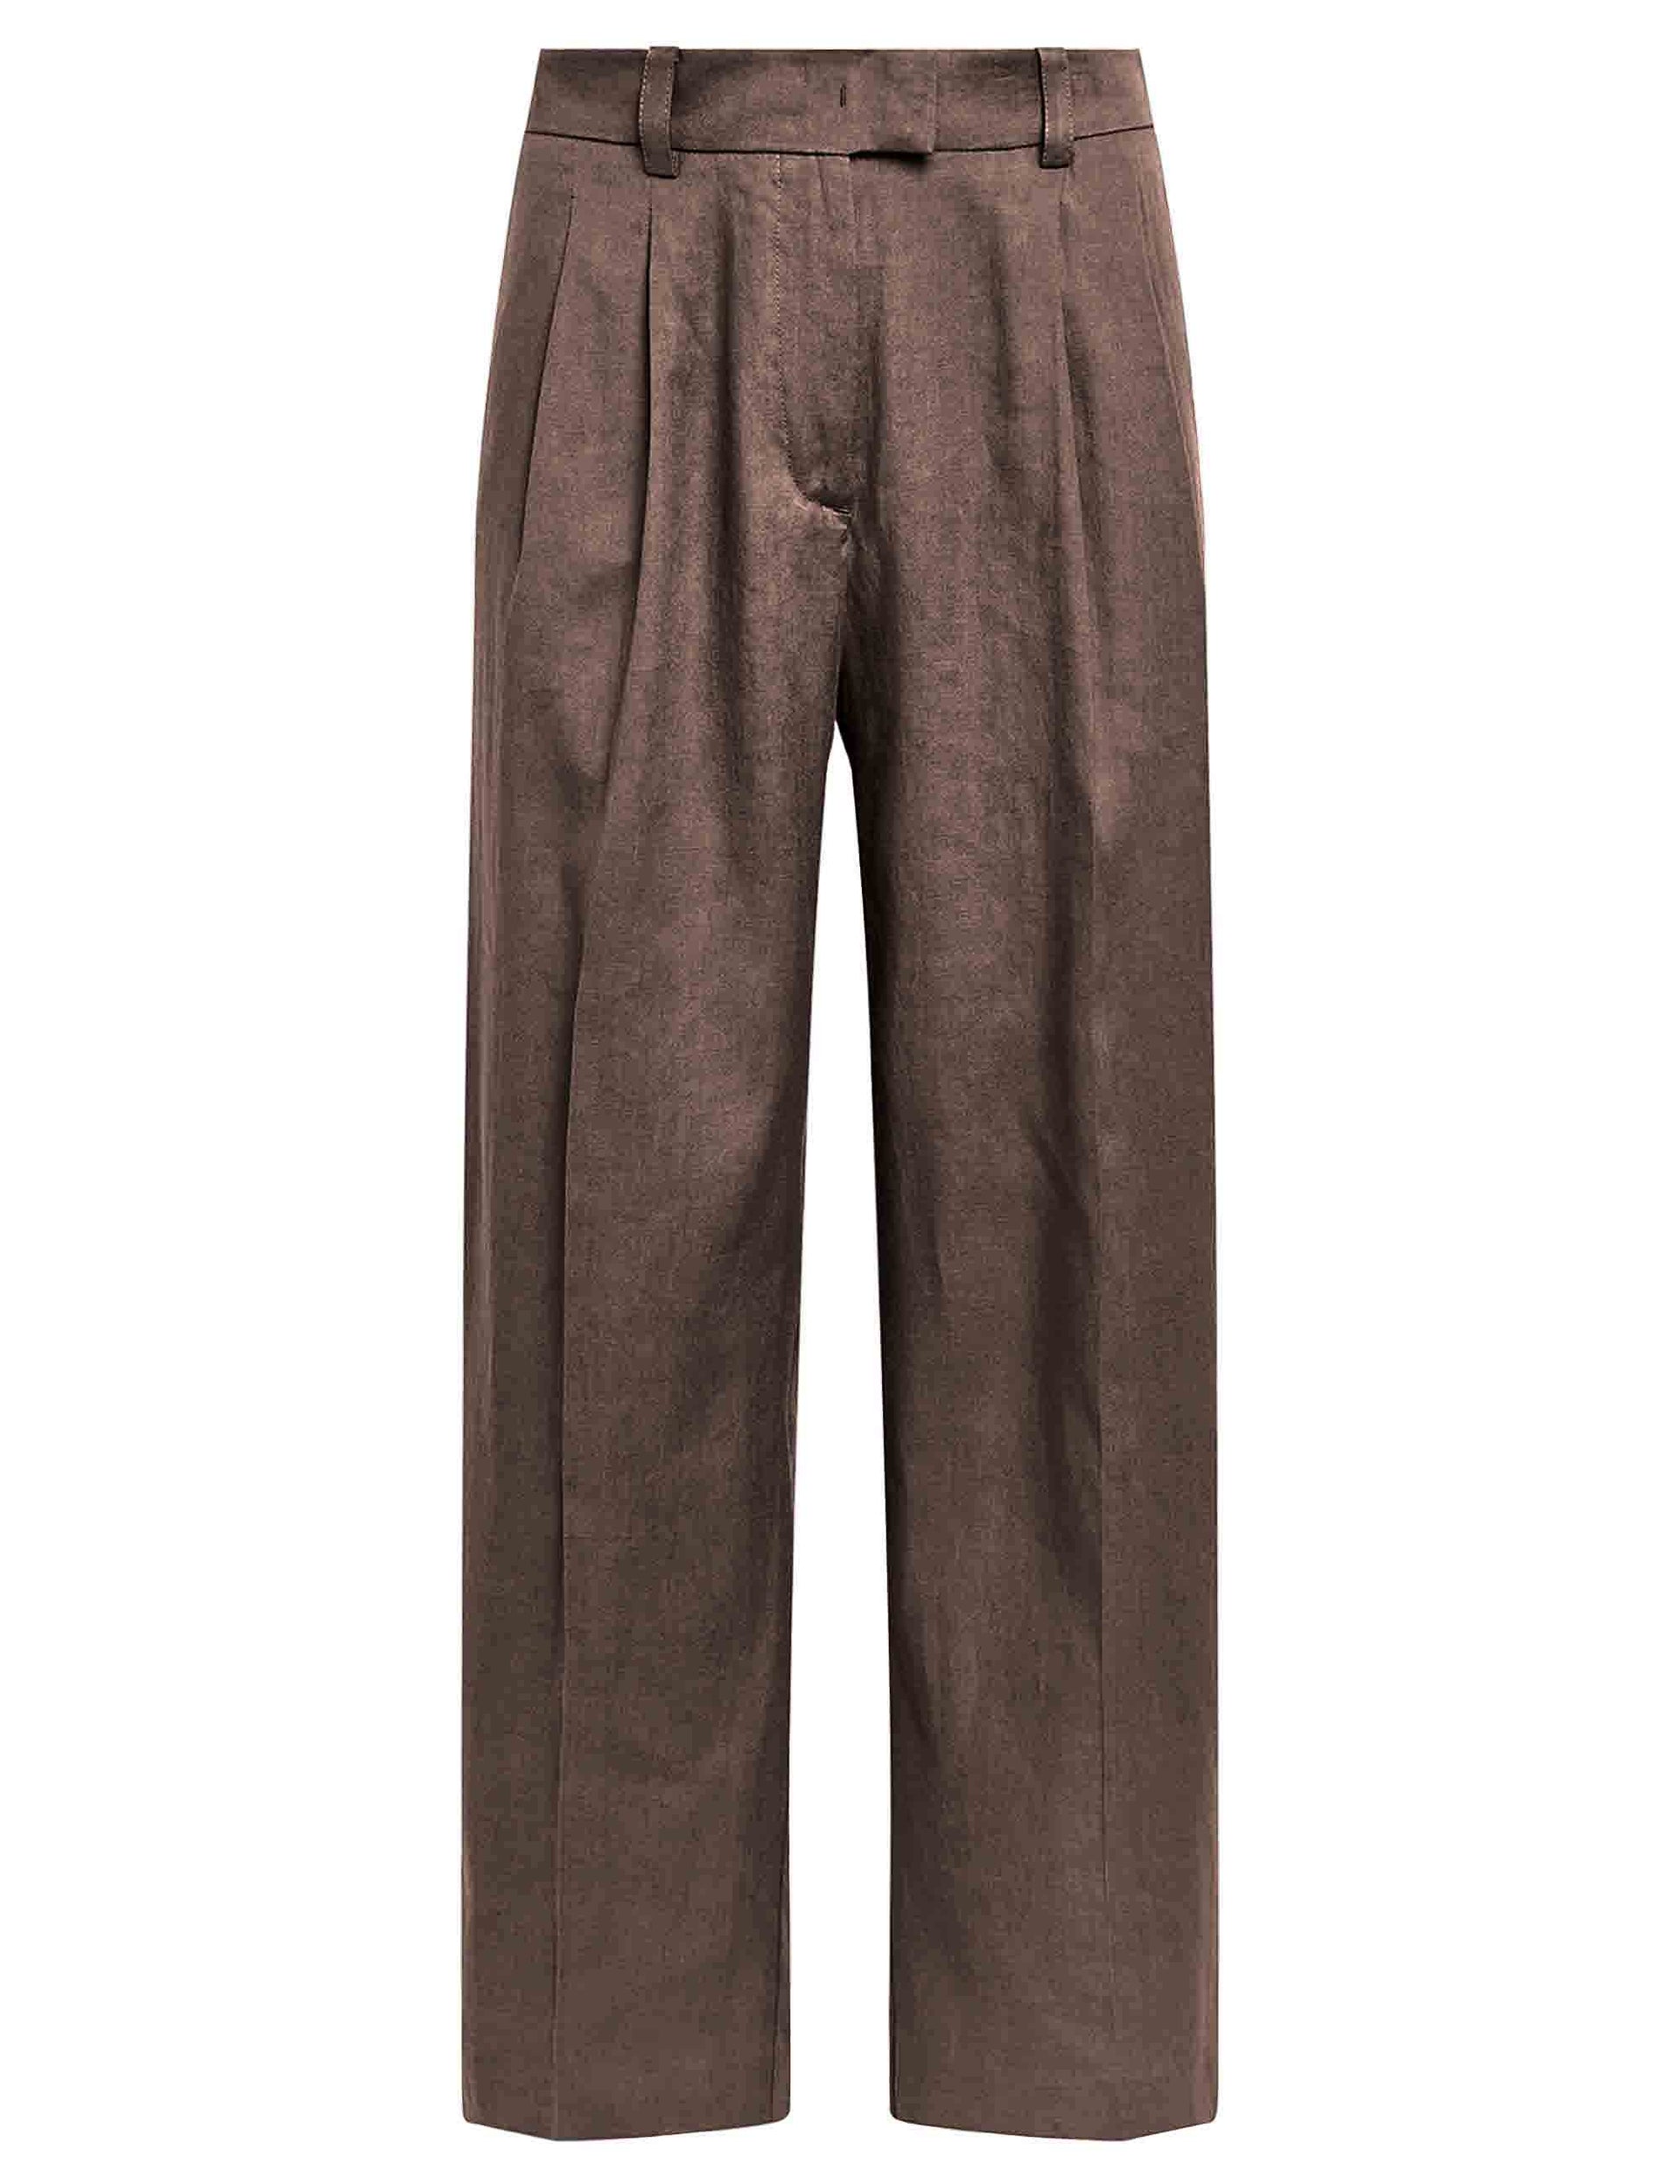 Linen women's trousers in brown linen and cotton blend